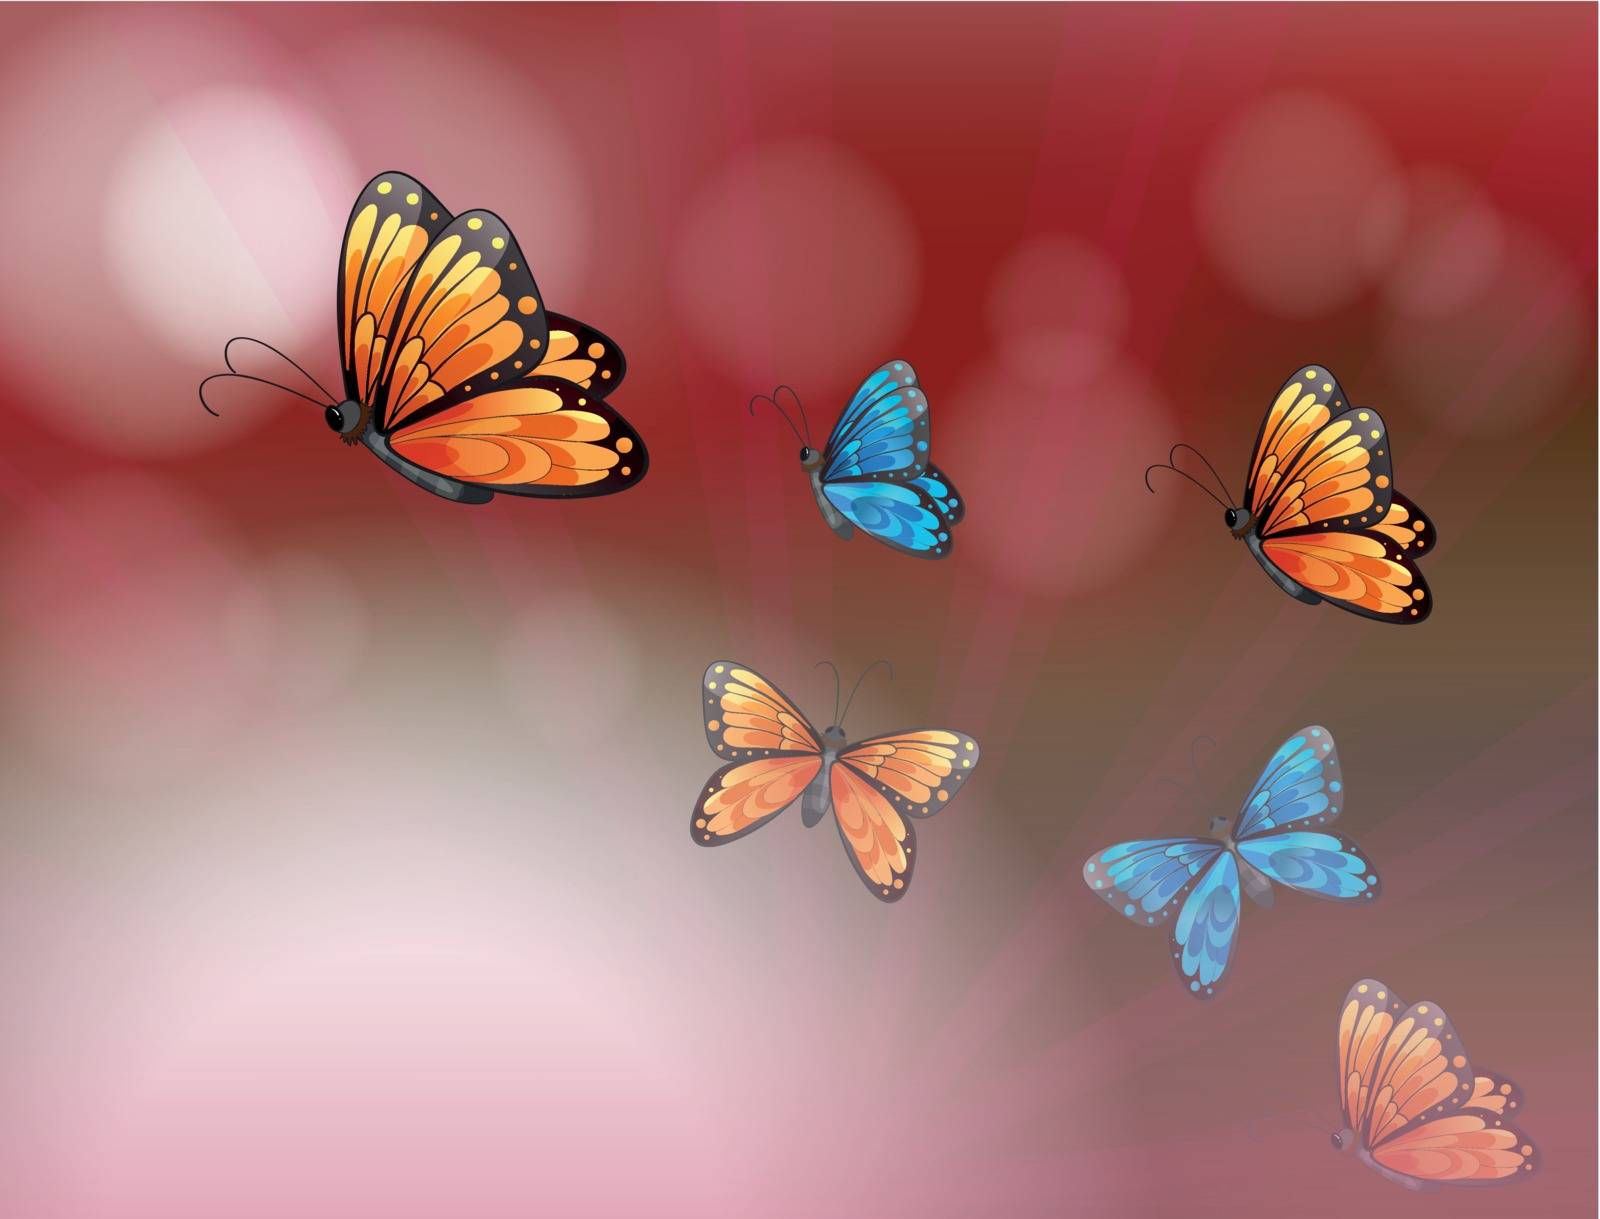 Illustration of a paper with butterflies